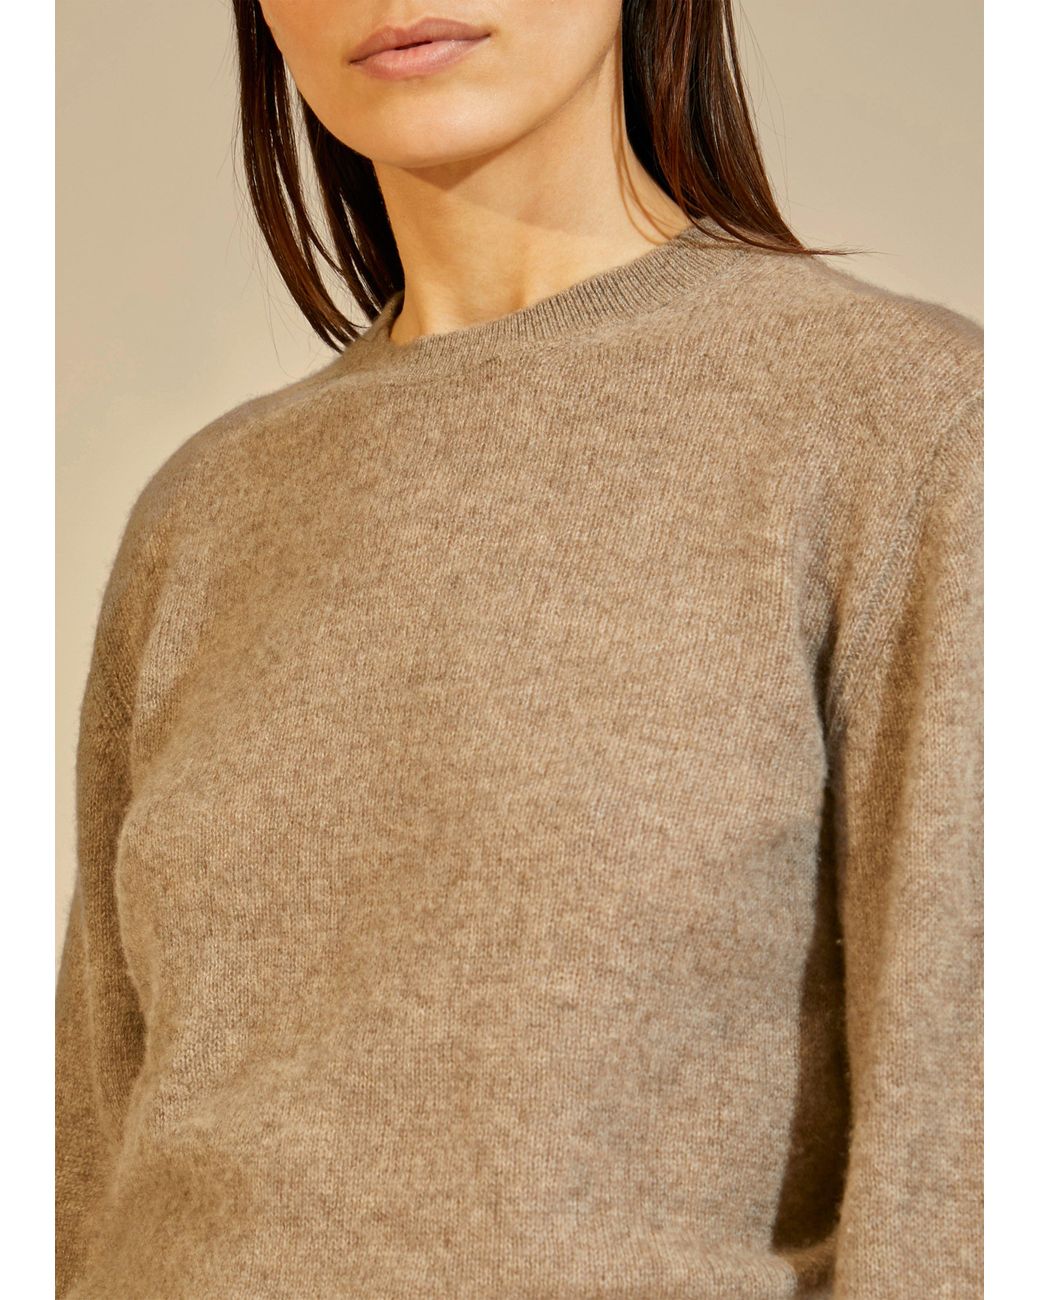 Khaite Cashmere The Viola Sweater in Natural - Lyst